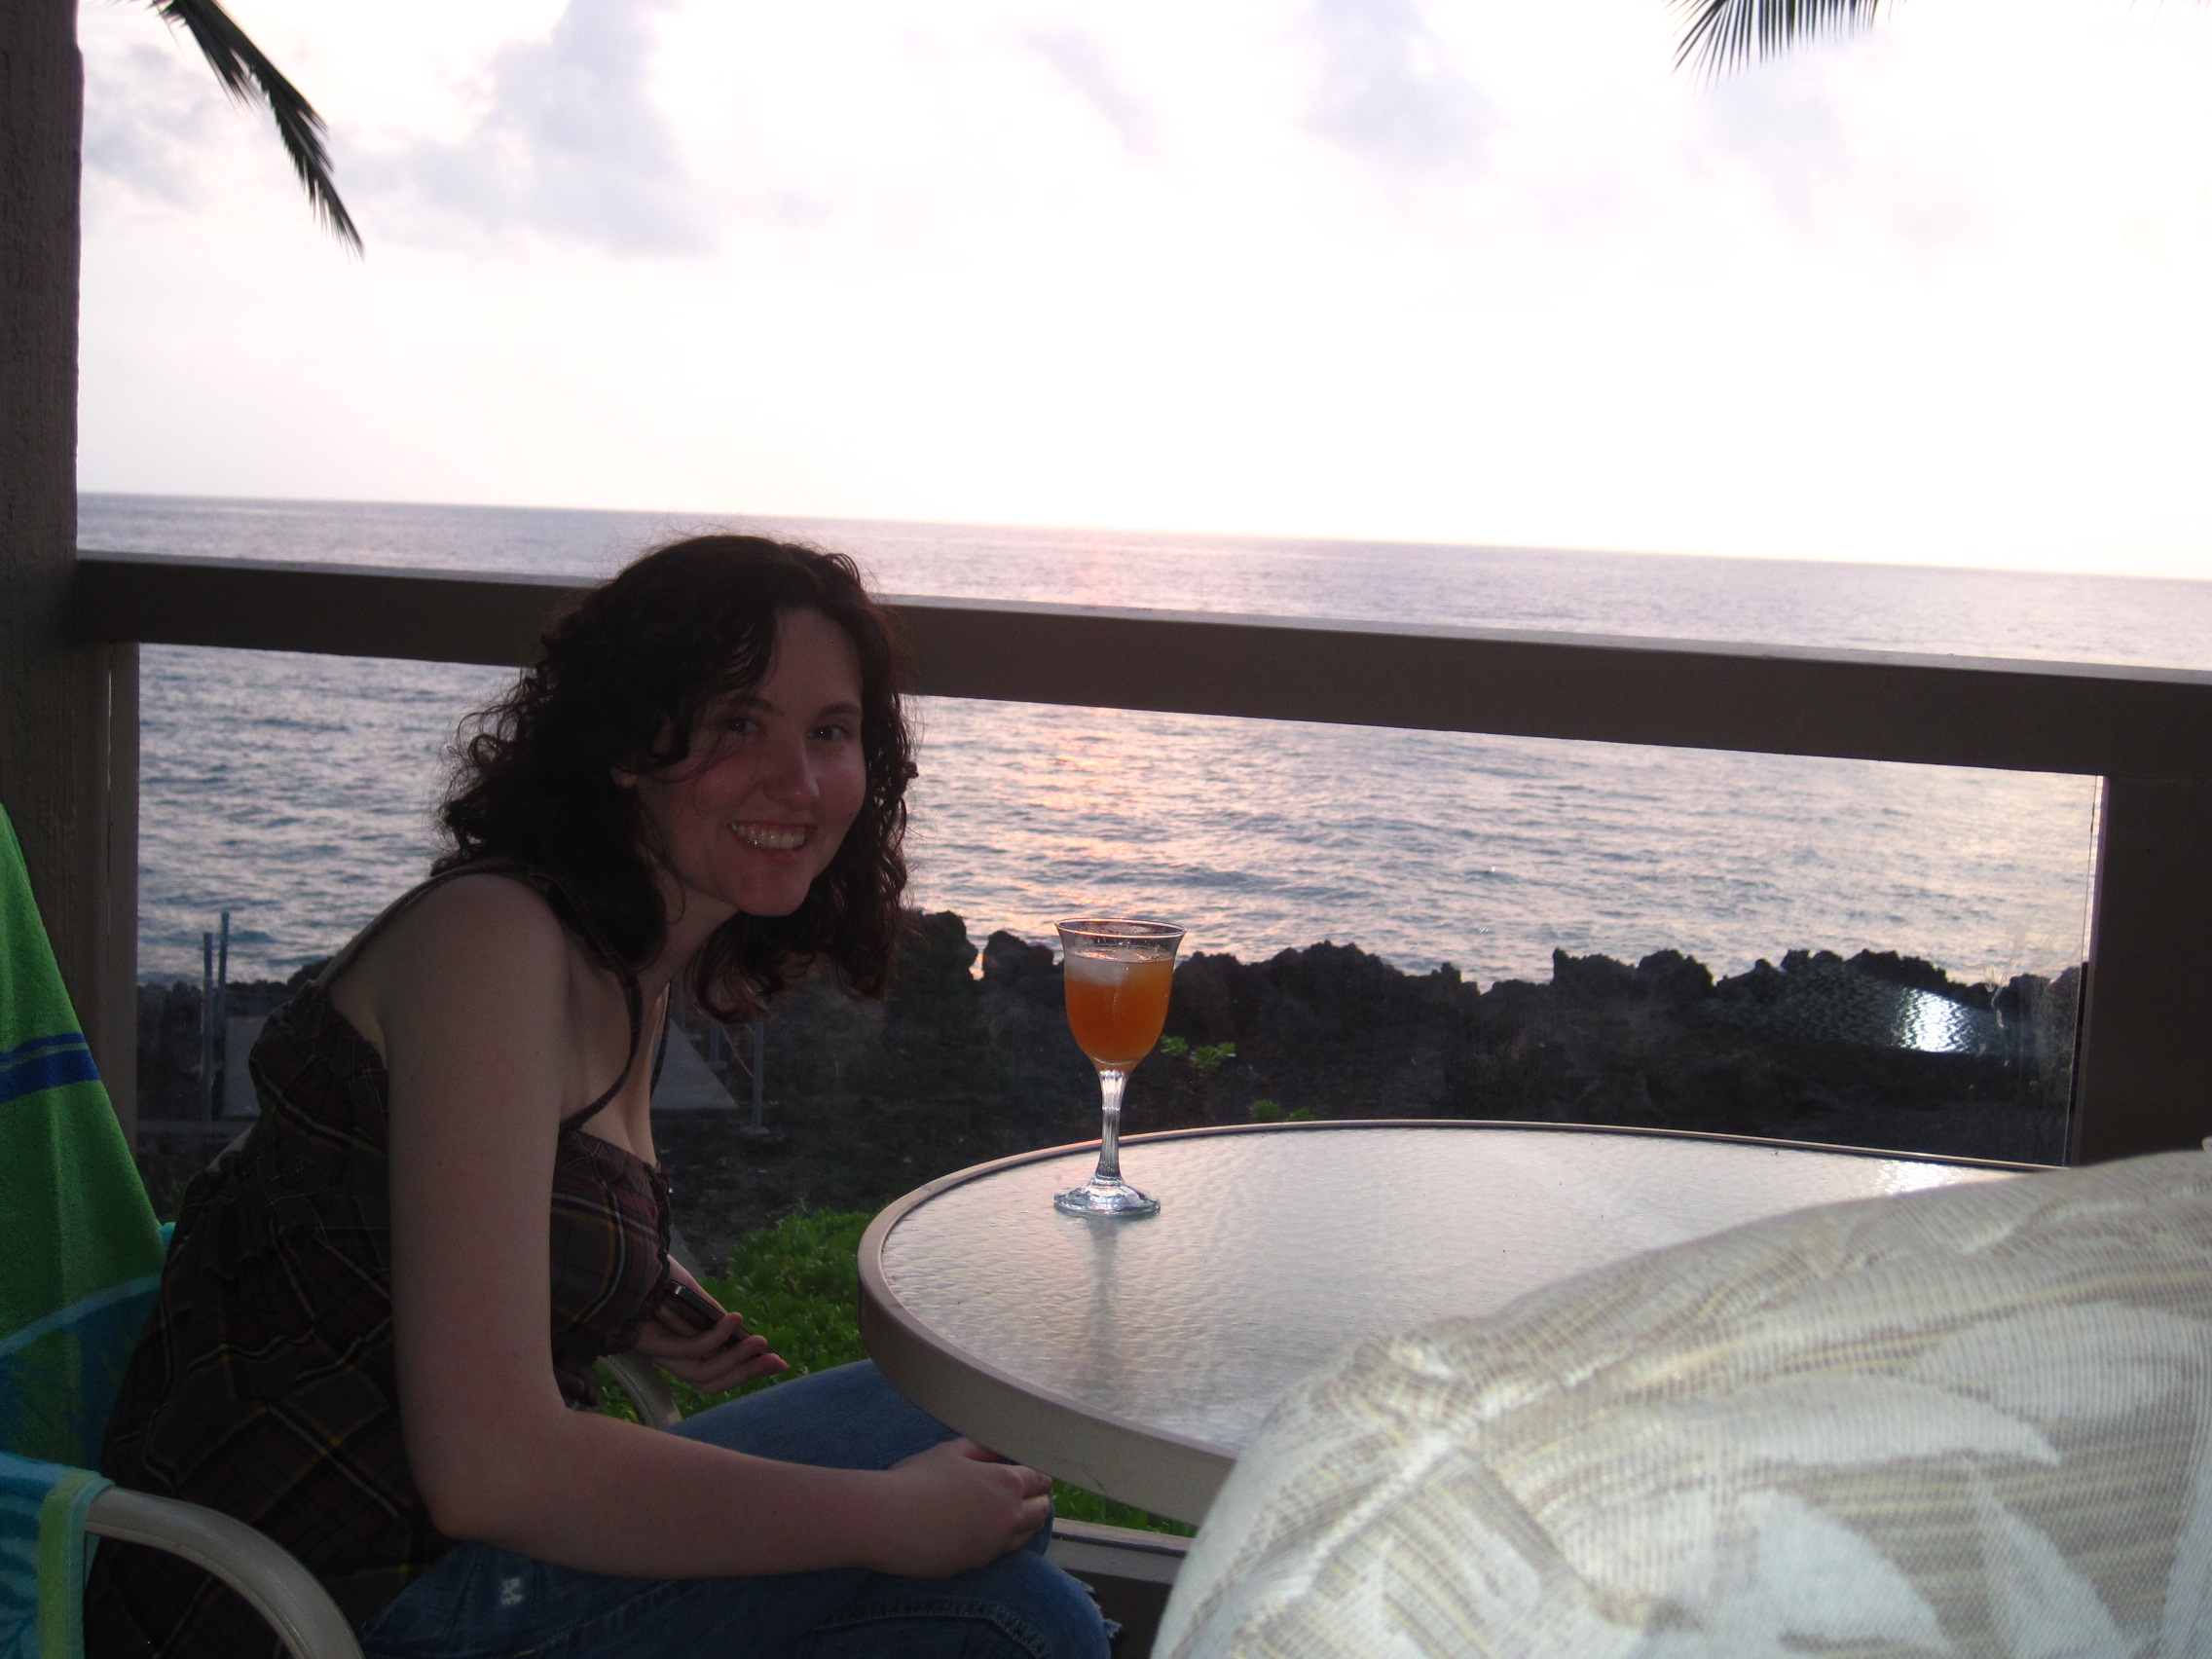 Mia Kalkhoff Xxn - Kelly is enjoying some POG (Passion Orange Guava) and champage while  watching the sunset.